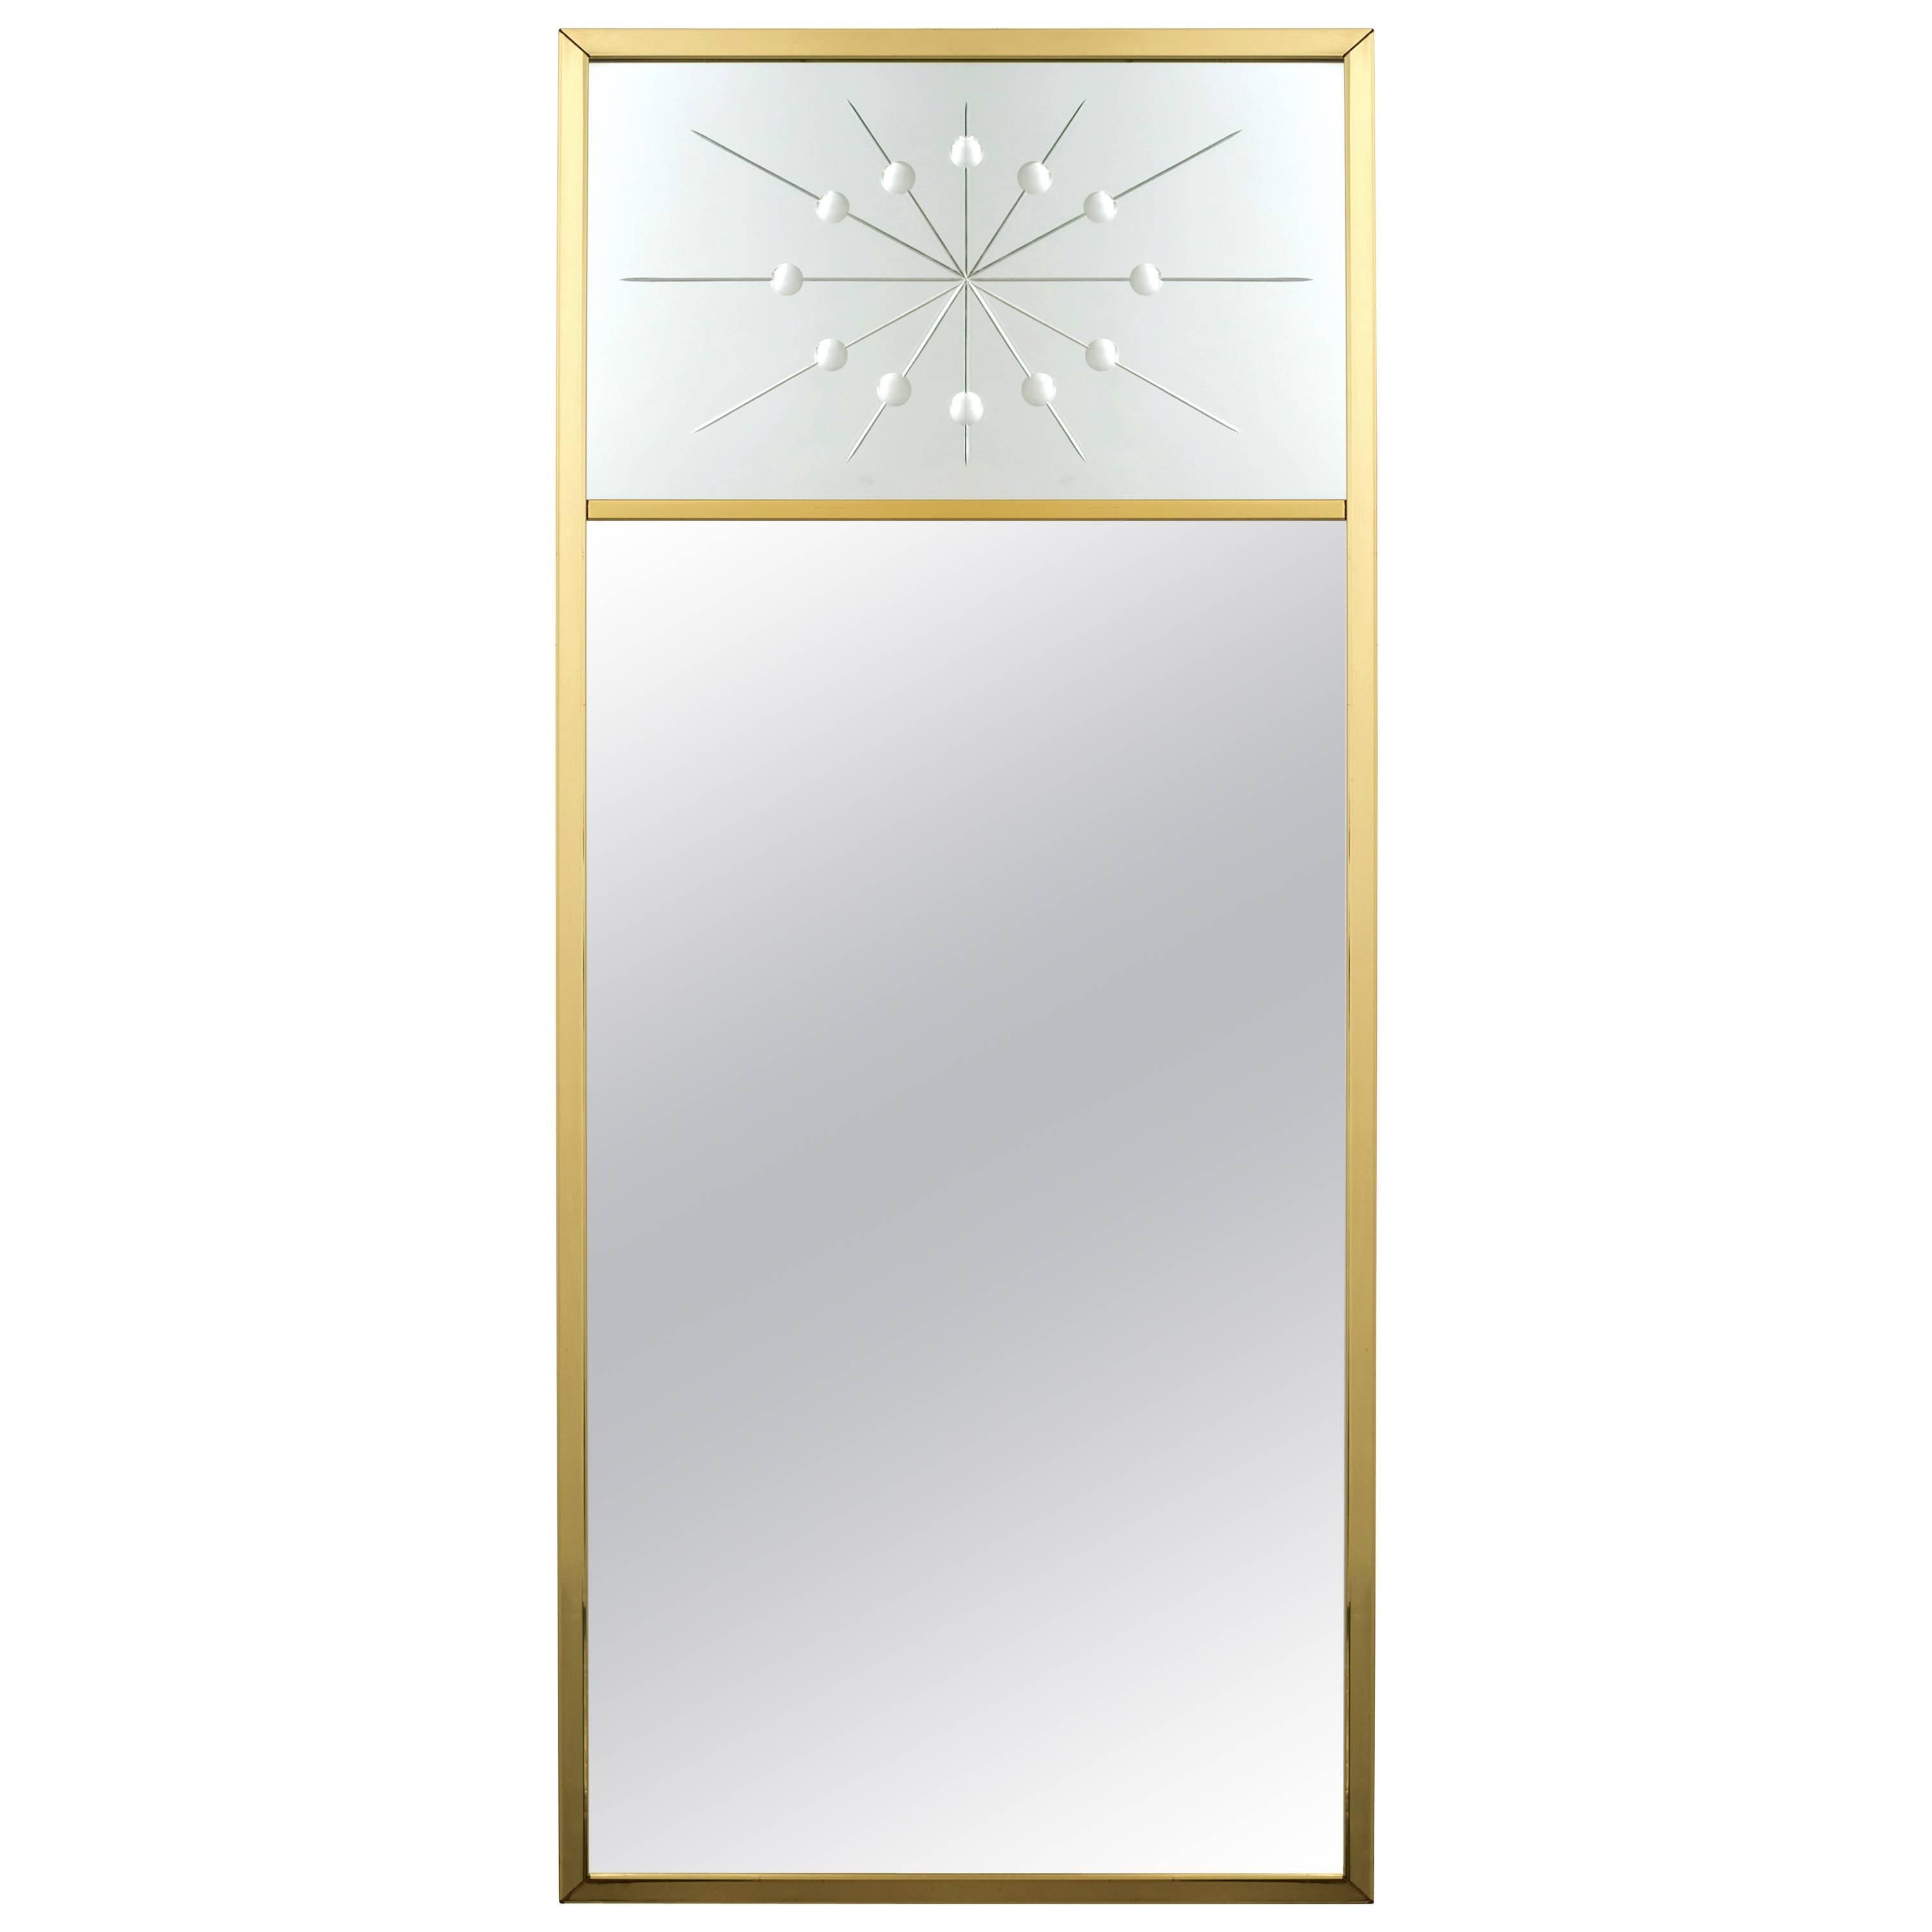 1960s Brass Wall Mirror with Atomic Design Motif After Tommi Parzinger 